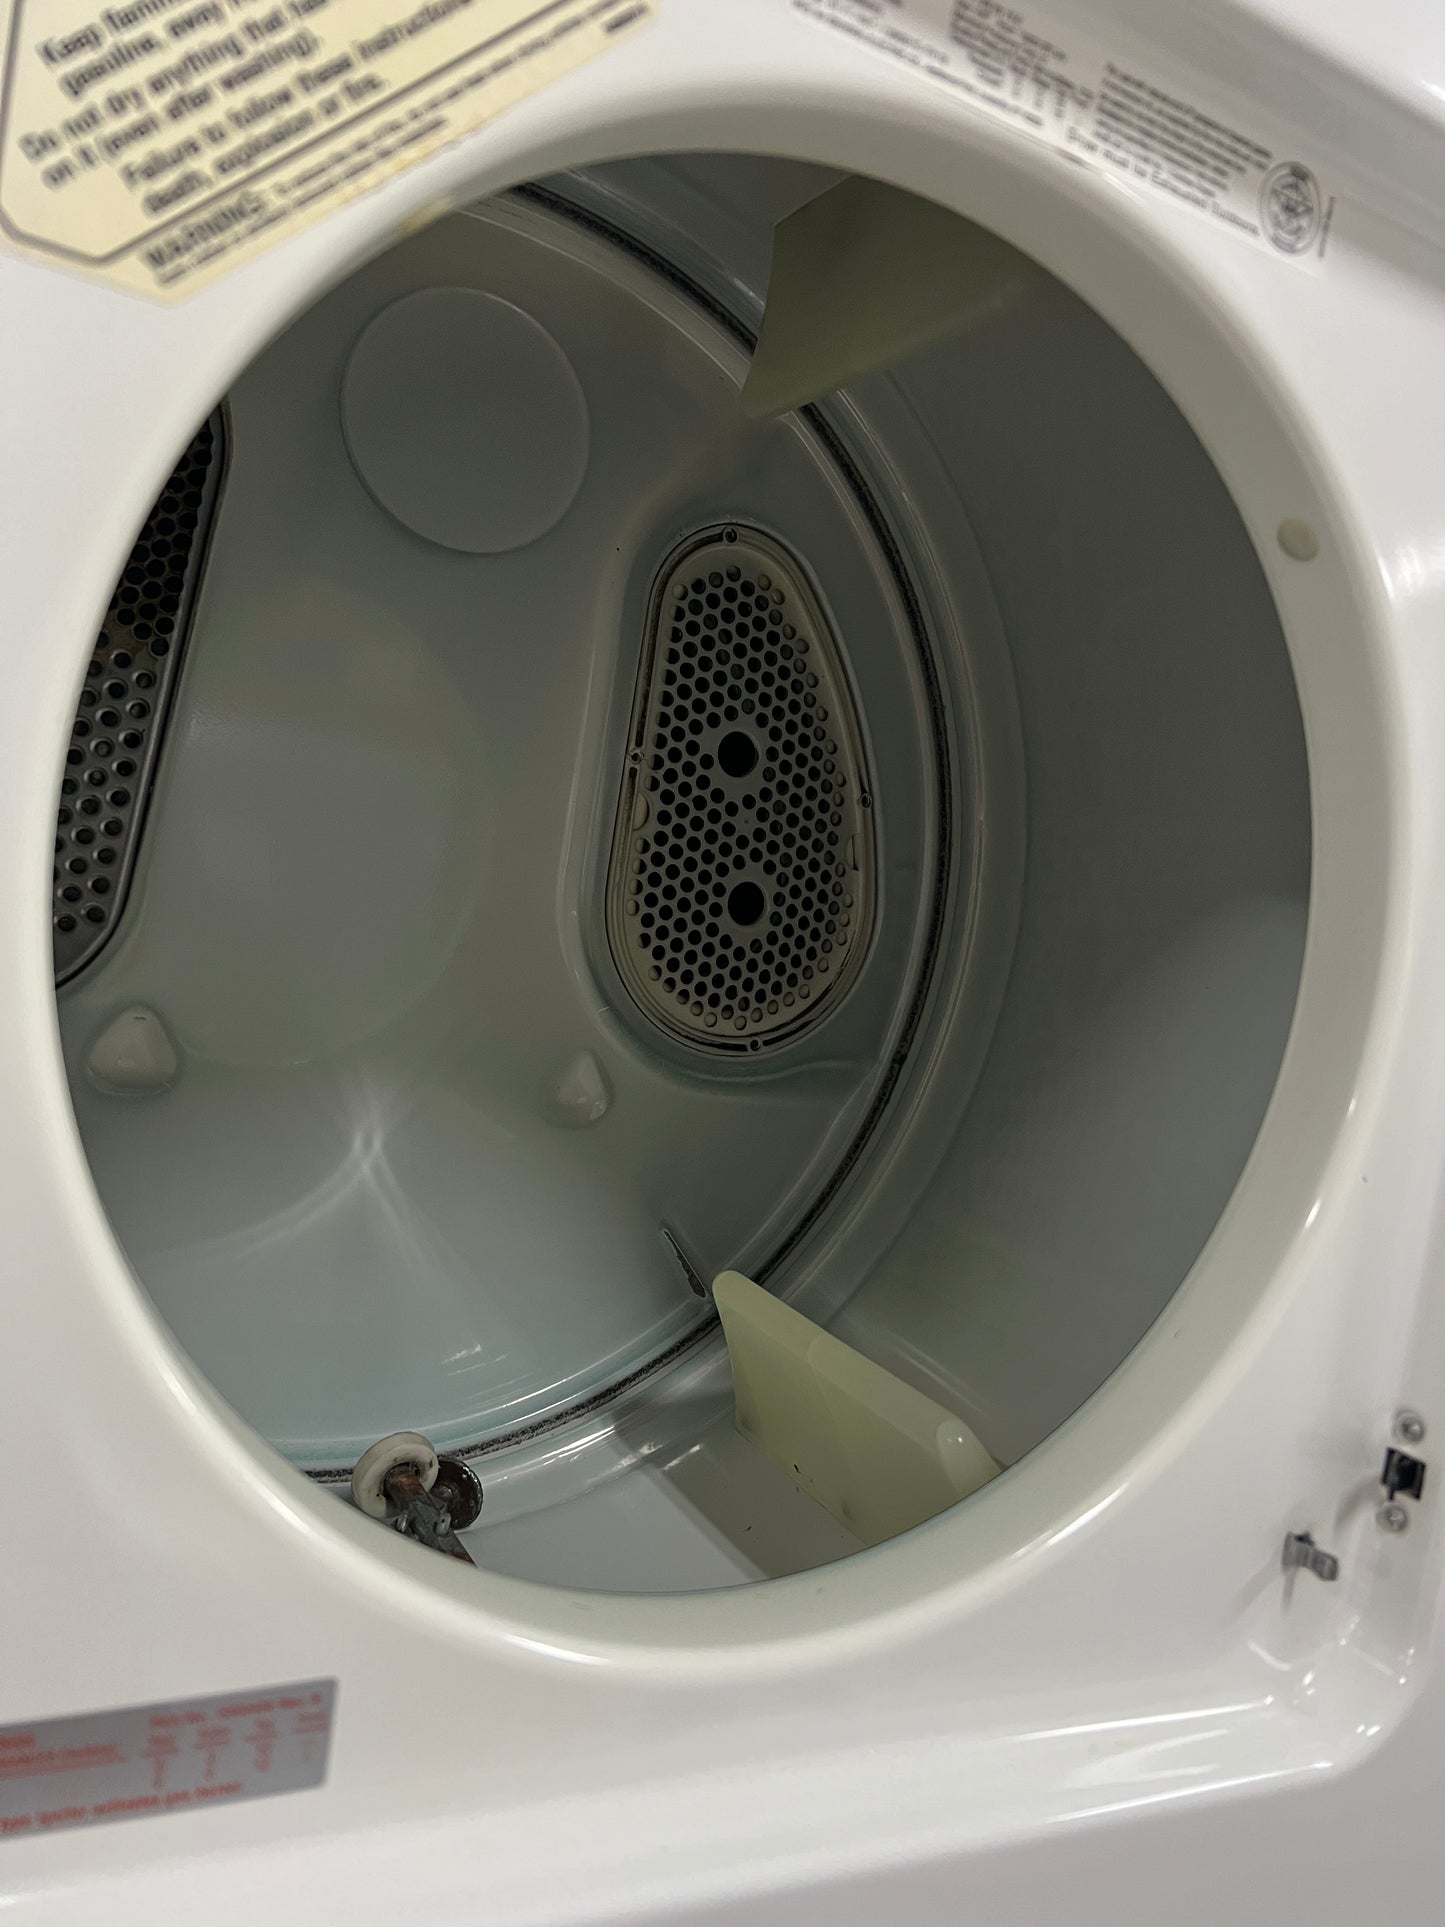 24" GE Laundry Center Washer and Gas Dryer in White wsm2480taaww 888125